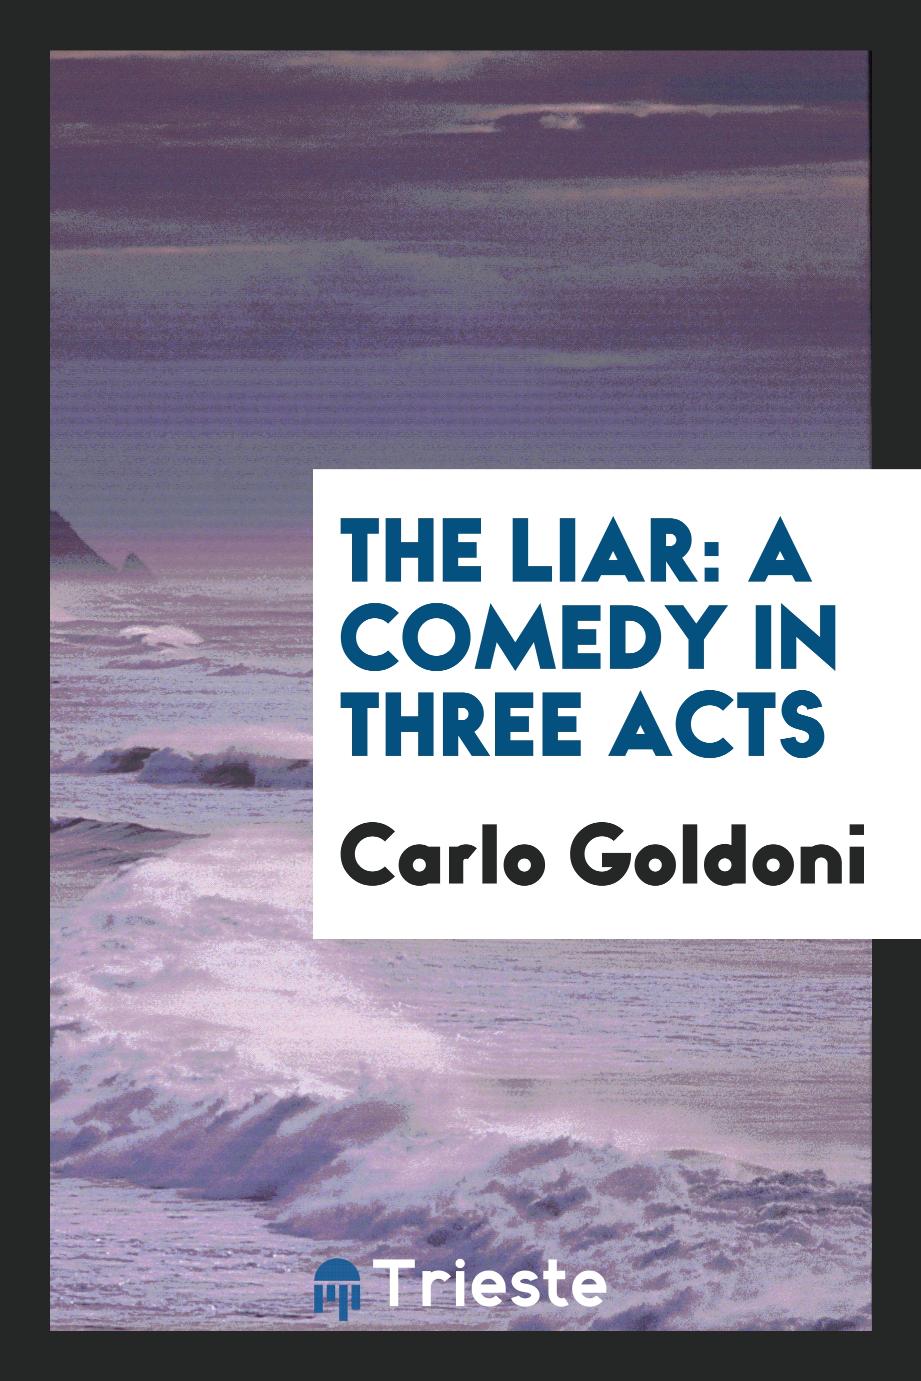 The liar: a comedy in three acts